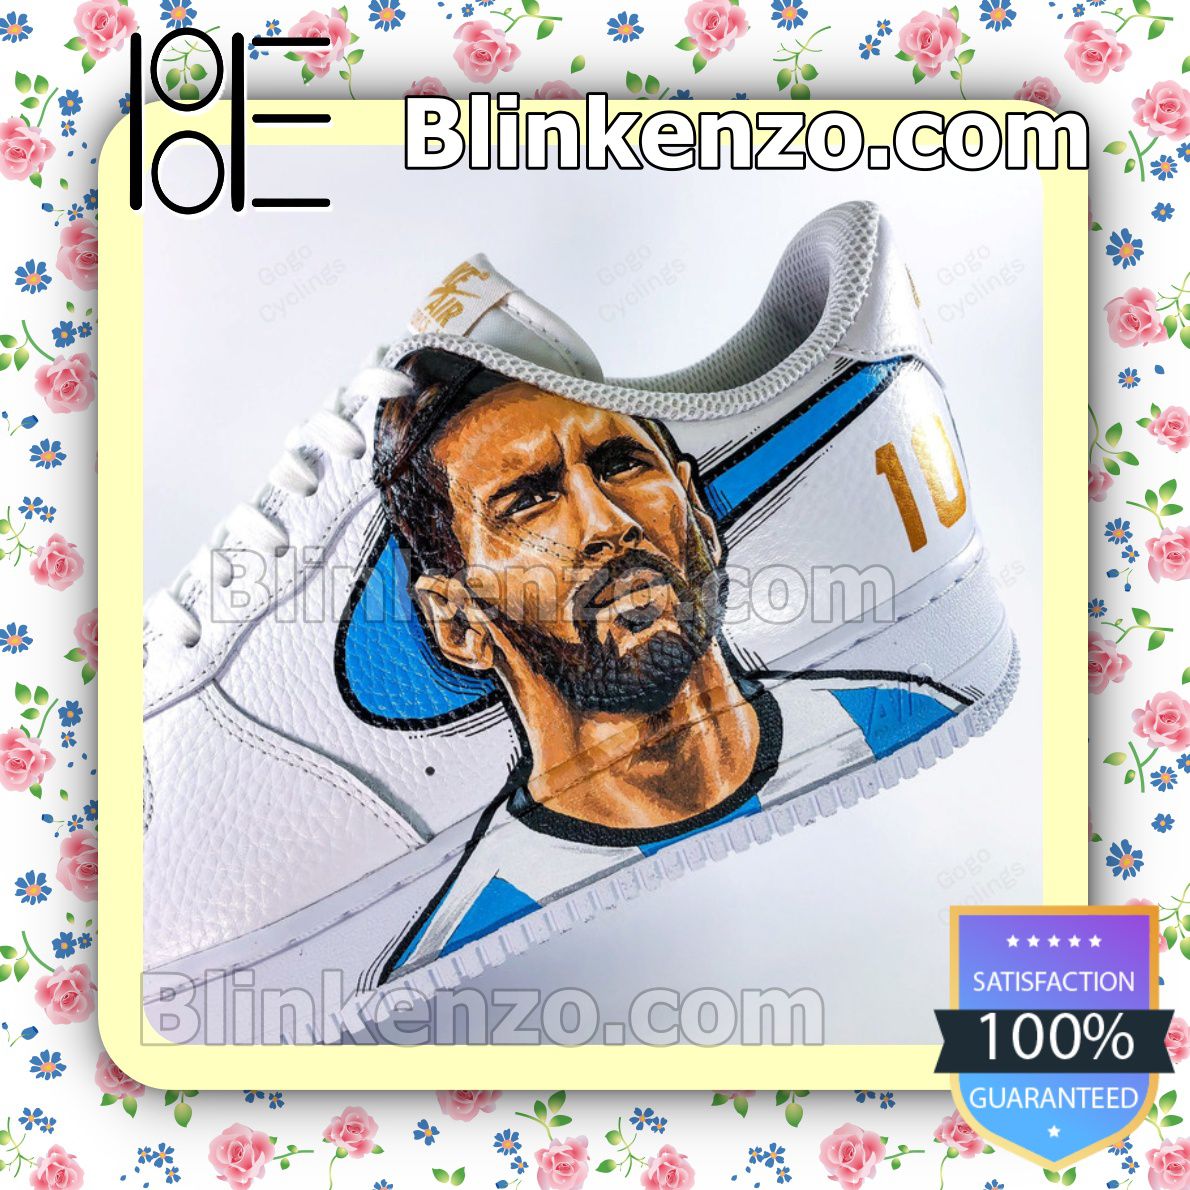 Lionel Argentina National Team Nike Shoes Sneakers Blinkenzo